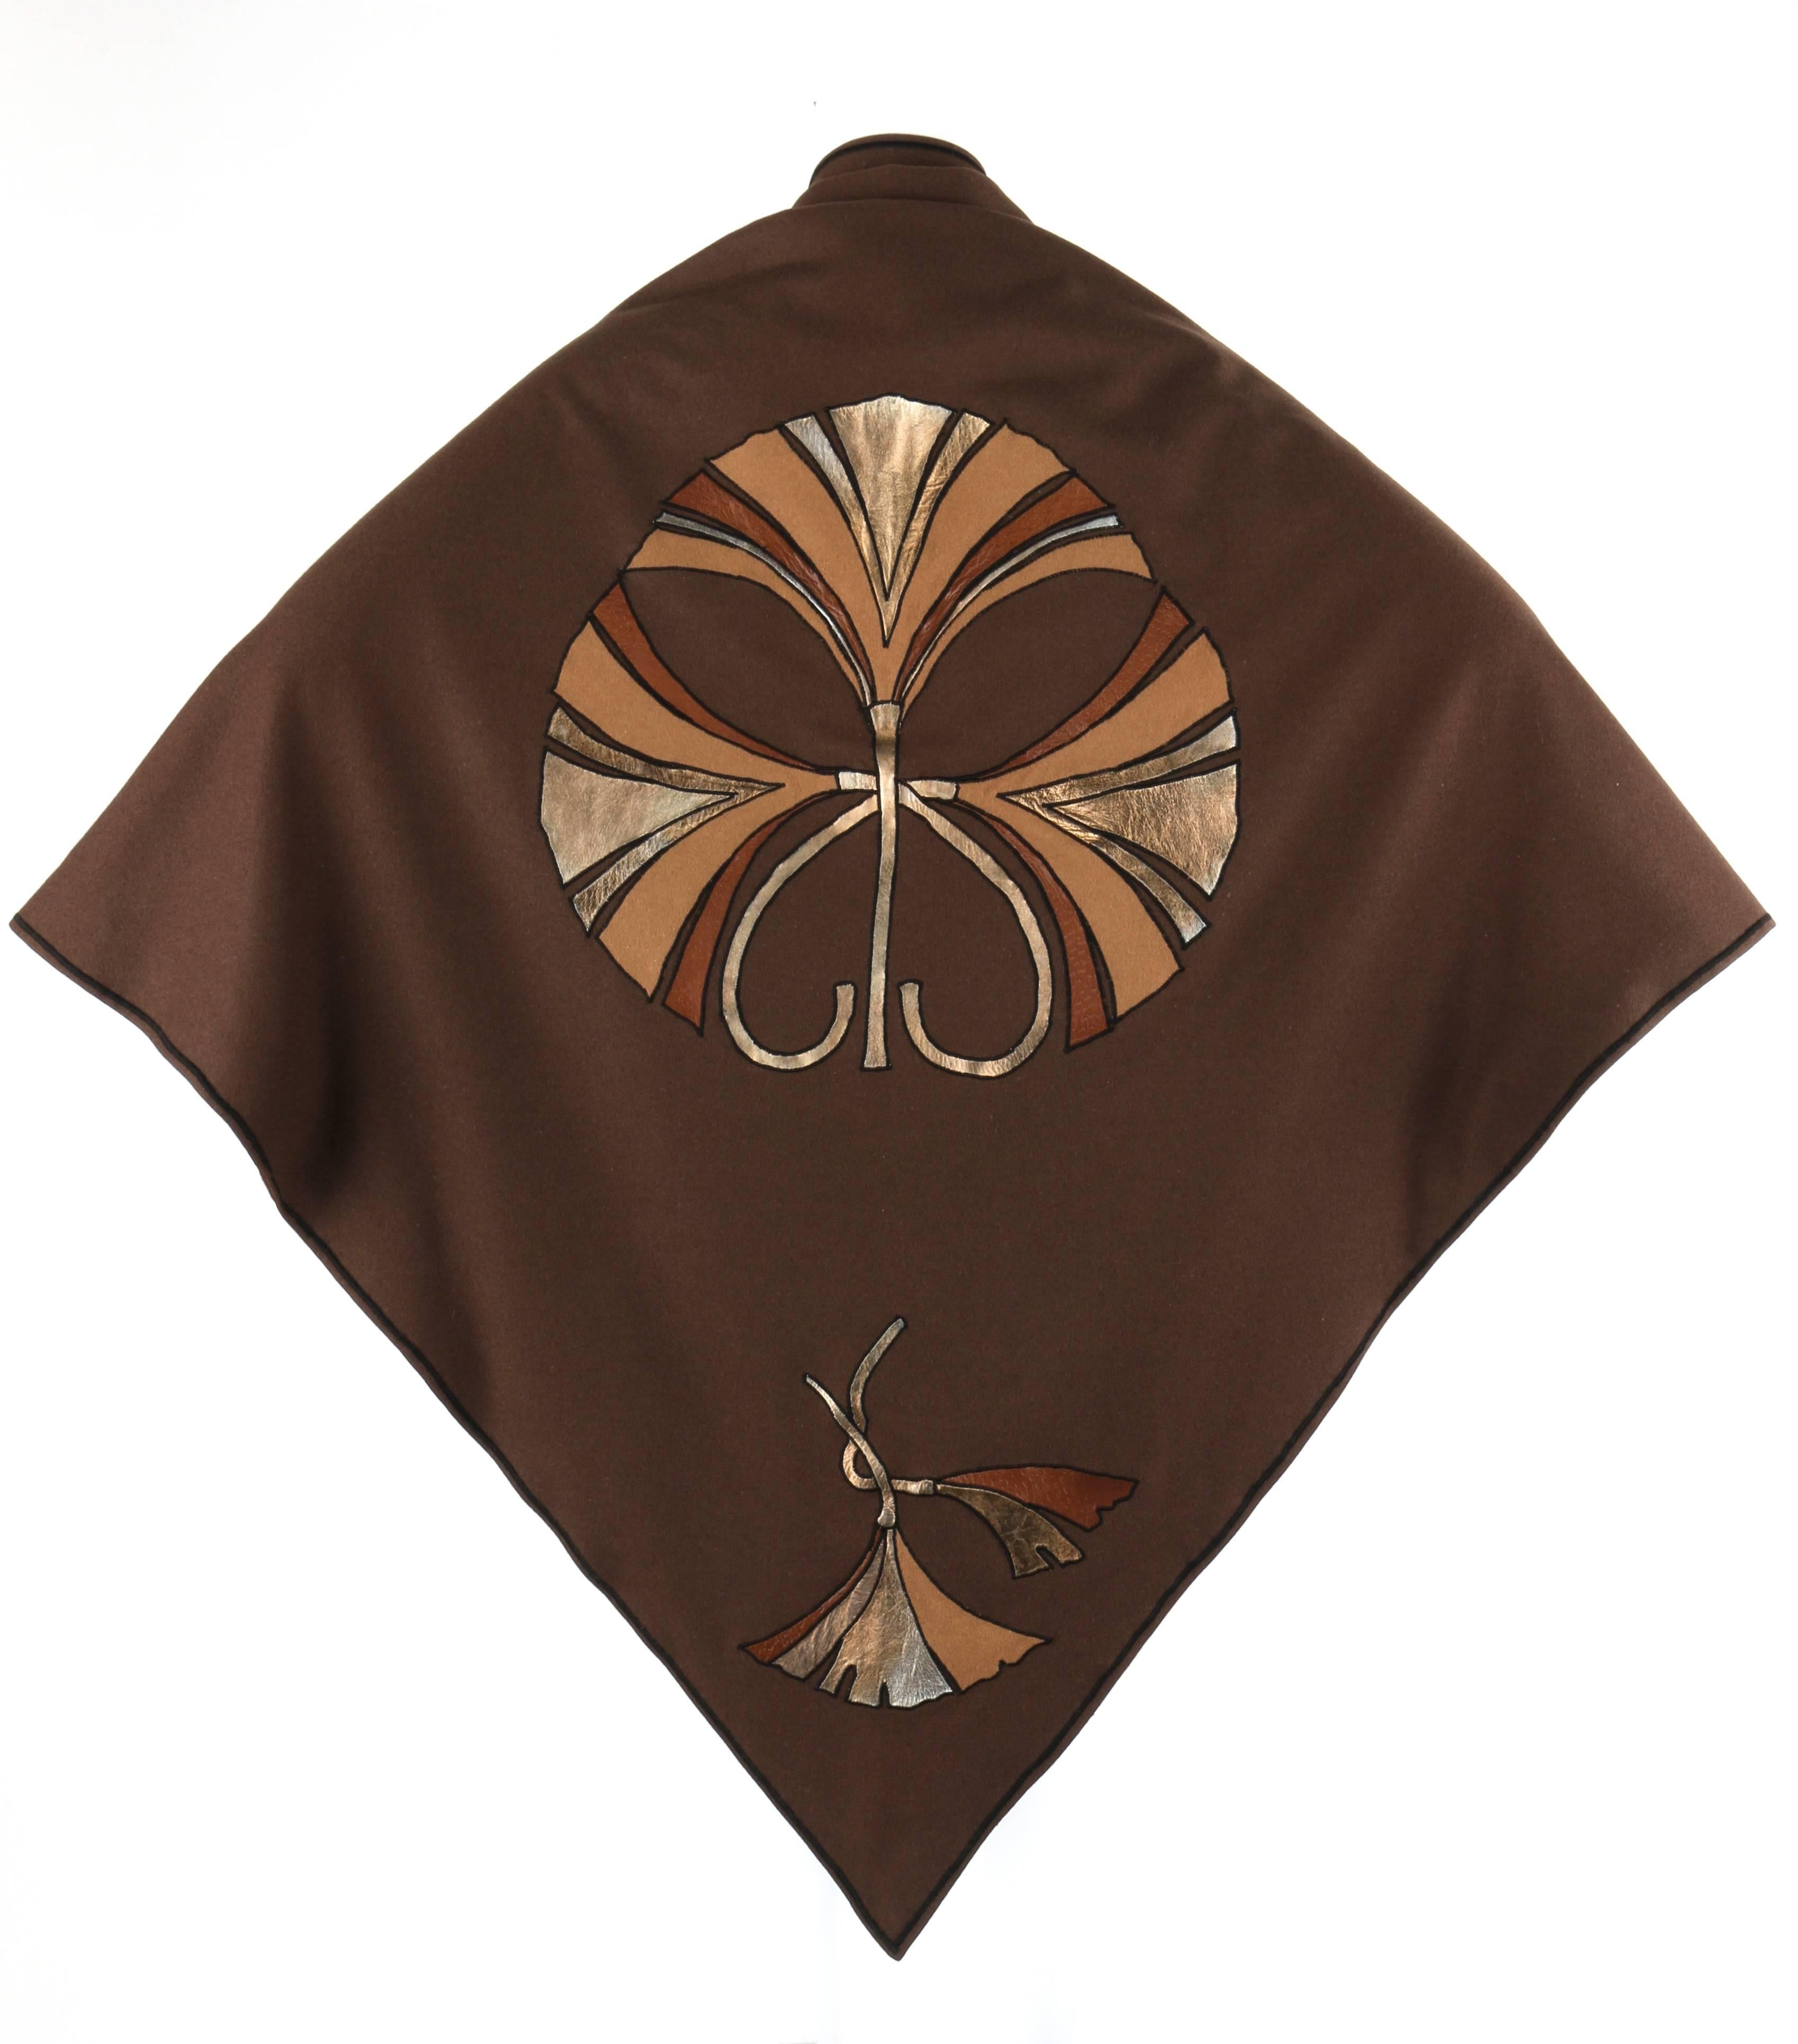 RARE Vintage Christian Dior c.1970's brown wool and leather fan art nouveau applique shawl/cape. Large triangular shape. Open front wrap style. Fan applique at center back and each corner in brown, metallic gold, and silver leather and wool. Thin